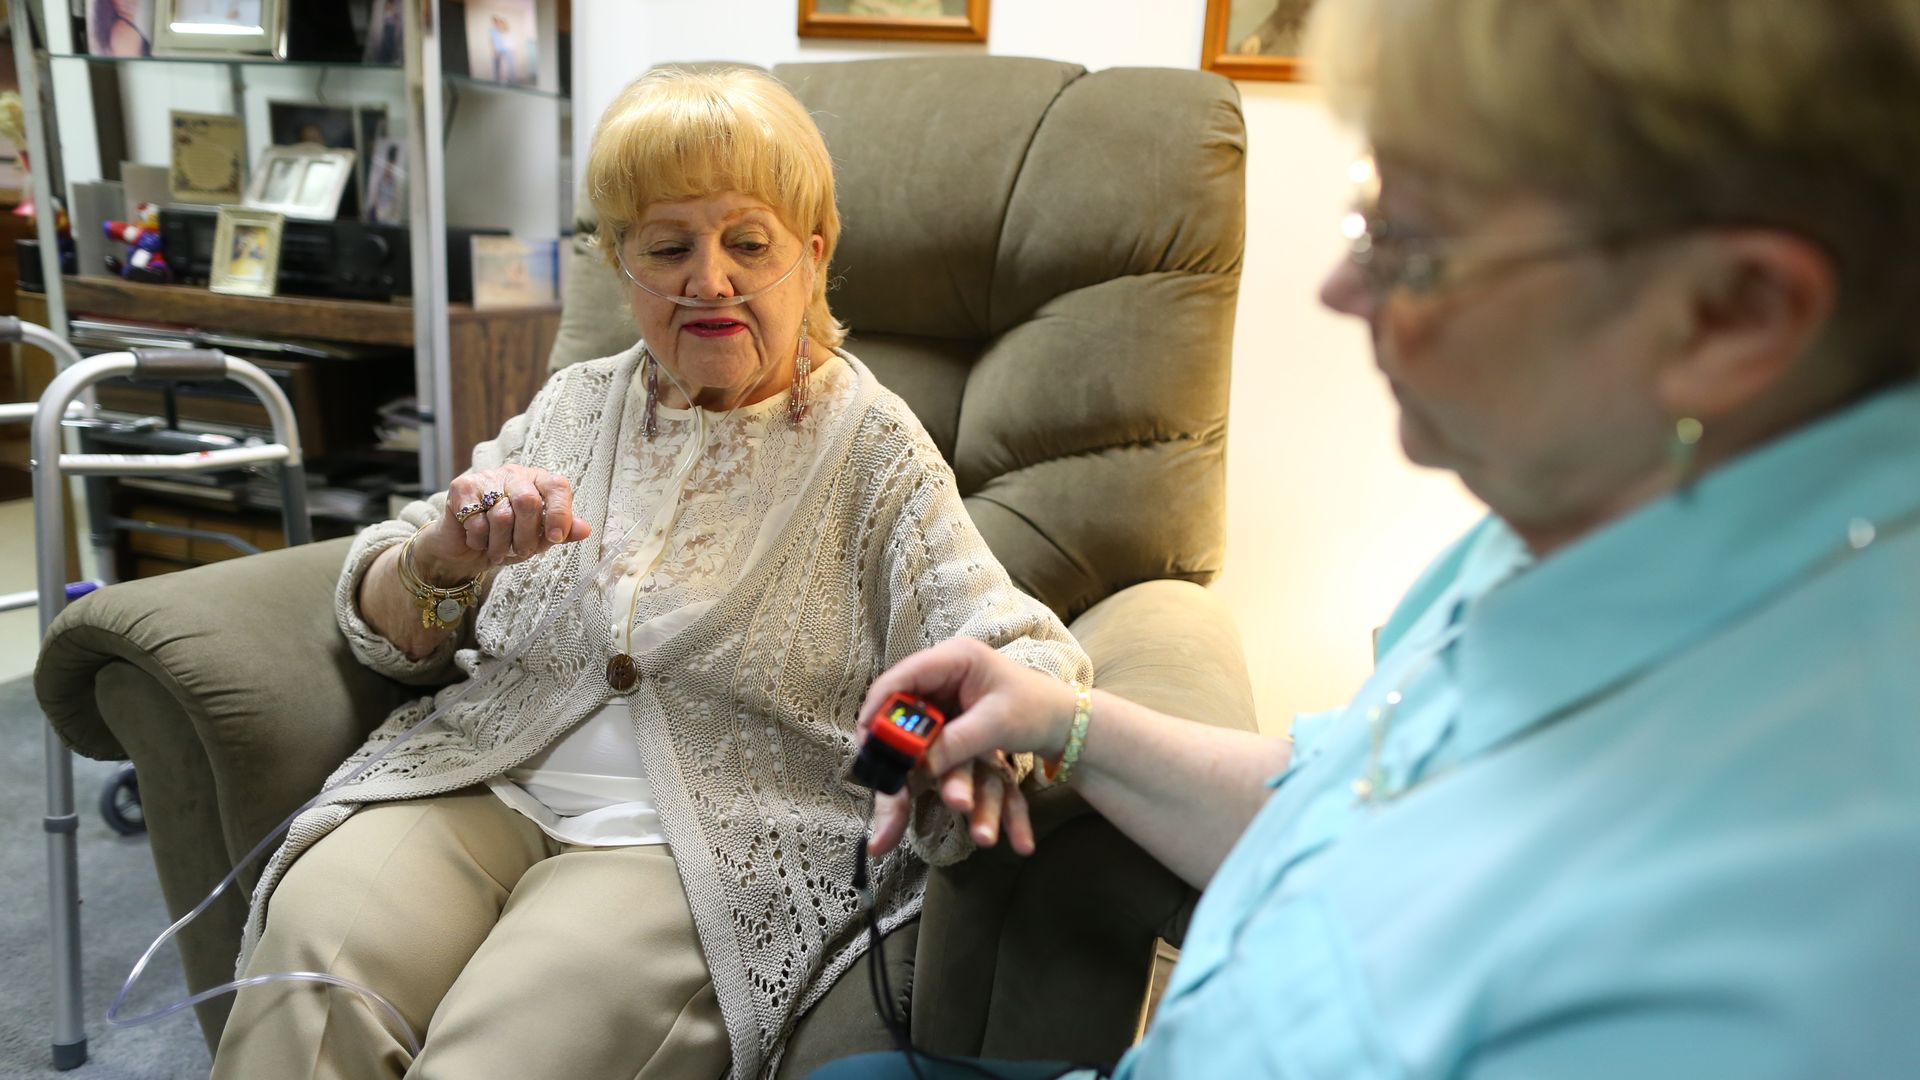 A patient with an oxygen tank gets observed by a nurse.